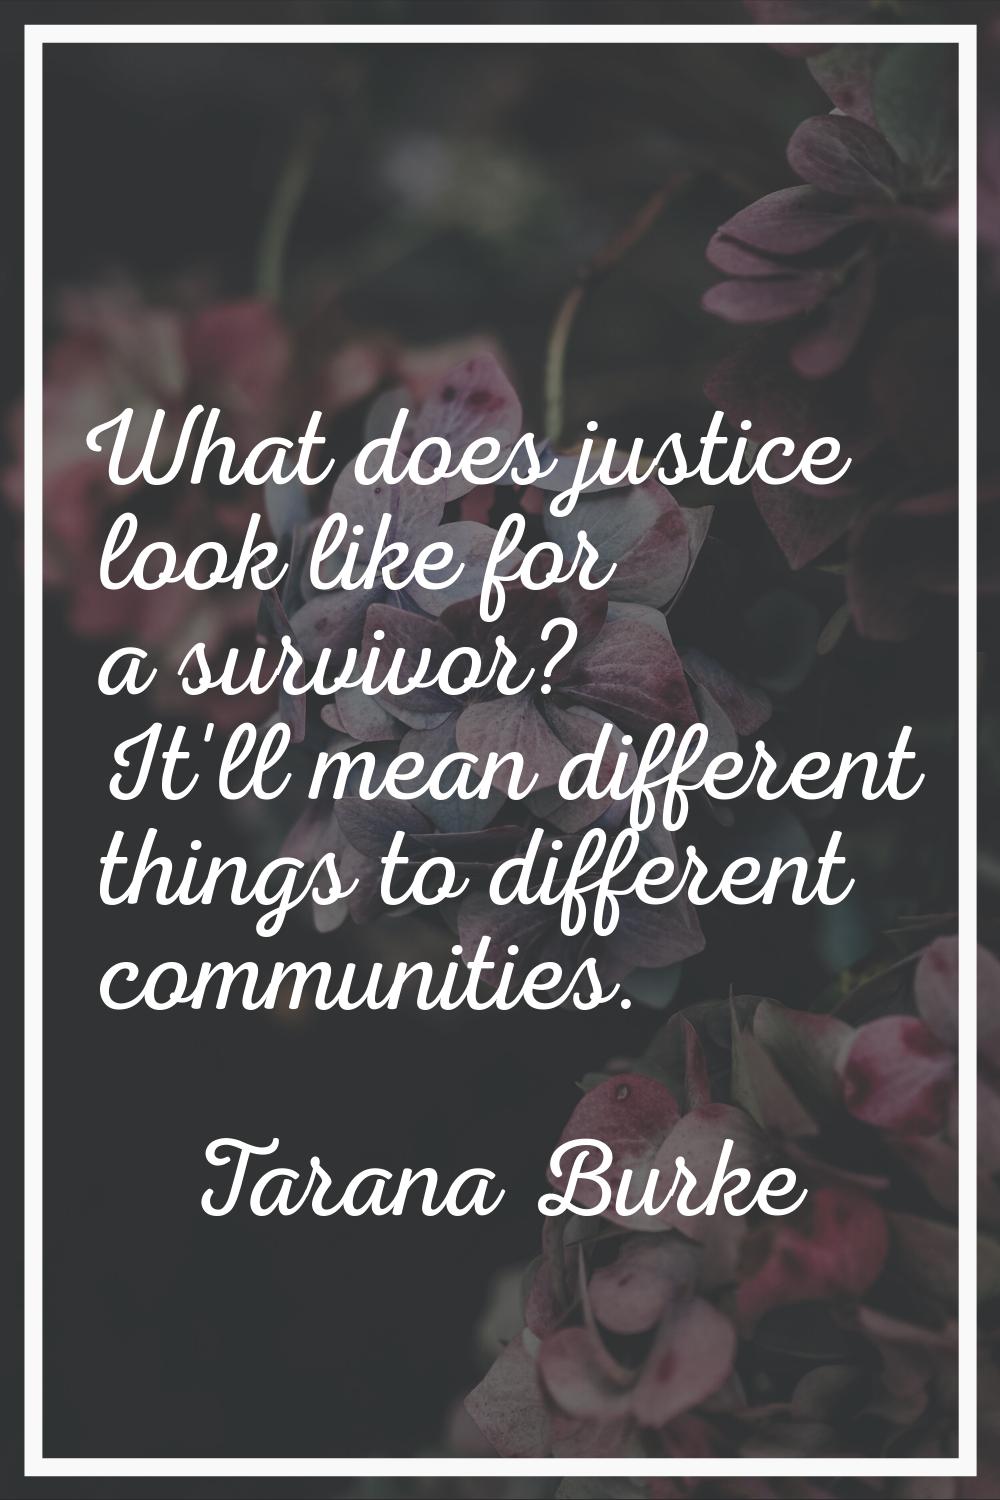 What does justice look like for a survivor? It'll mean different things to different communities.